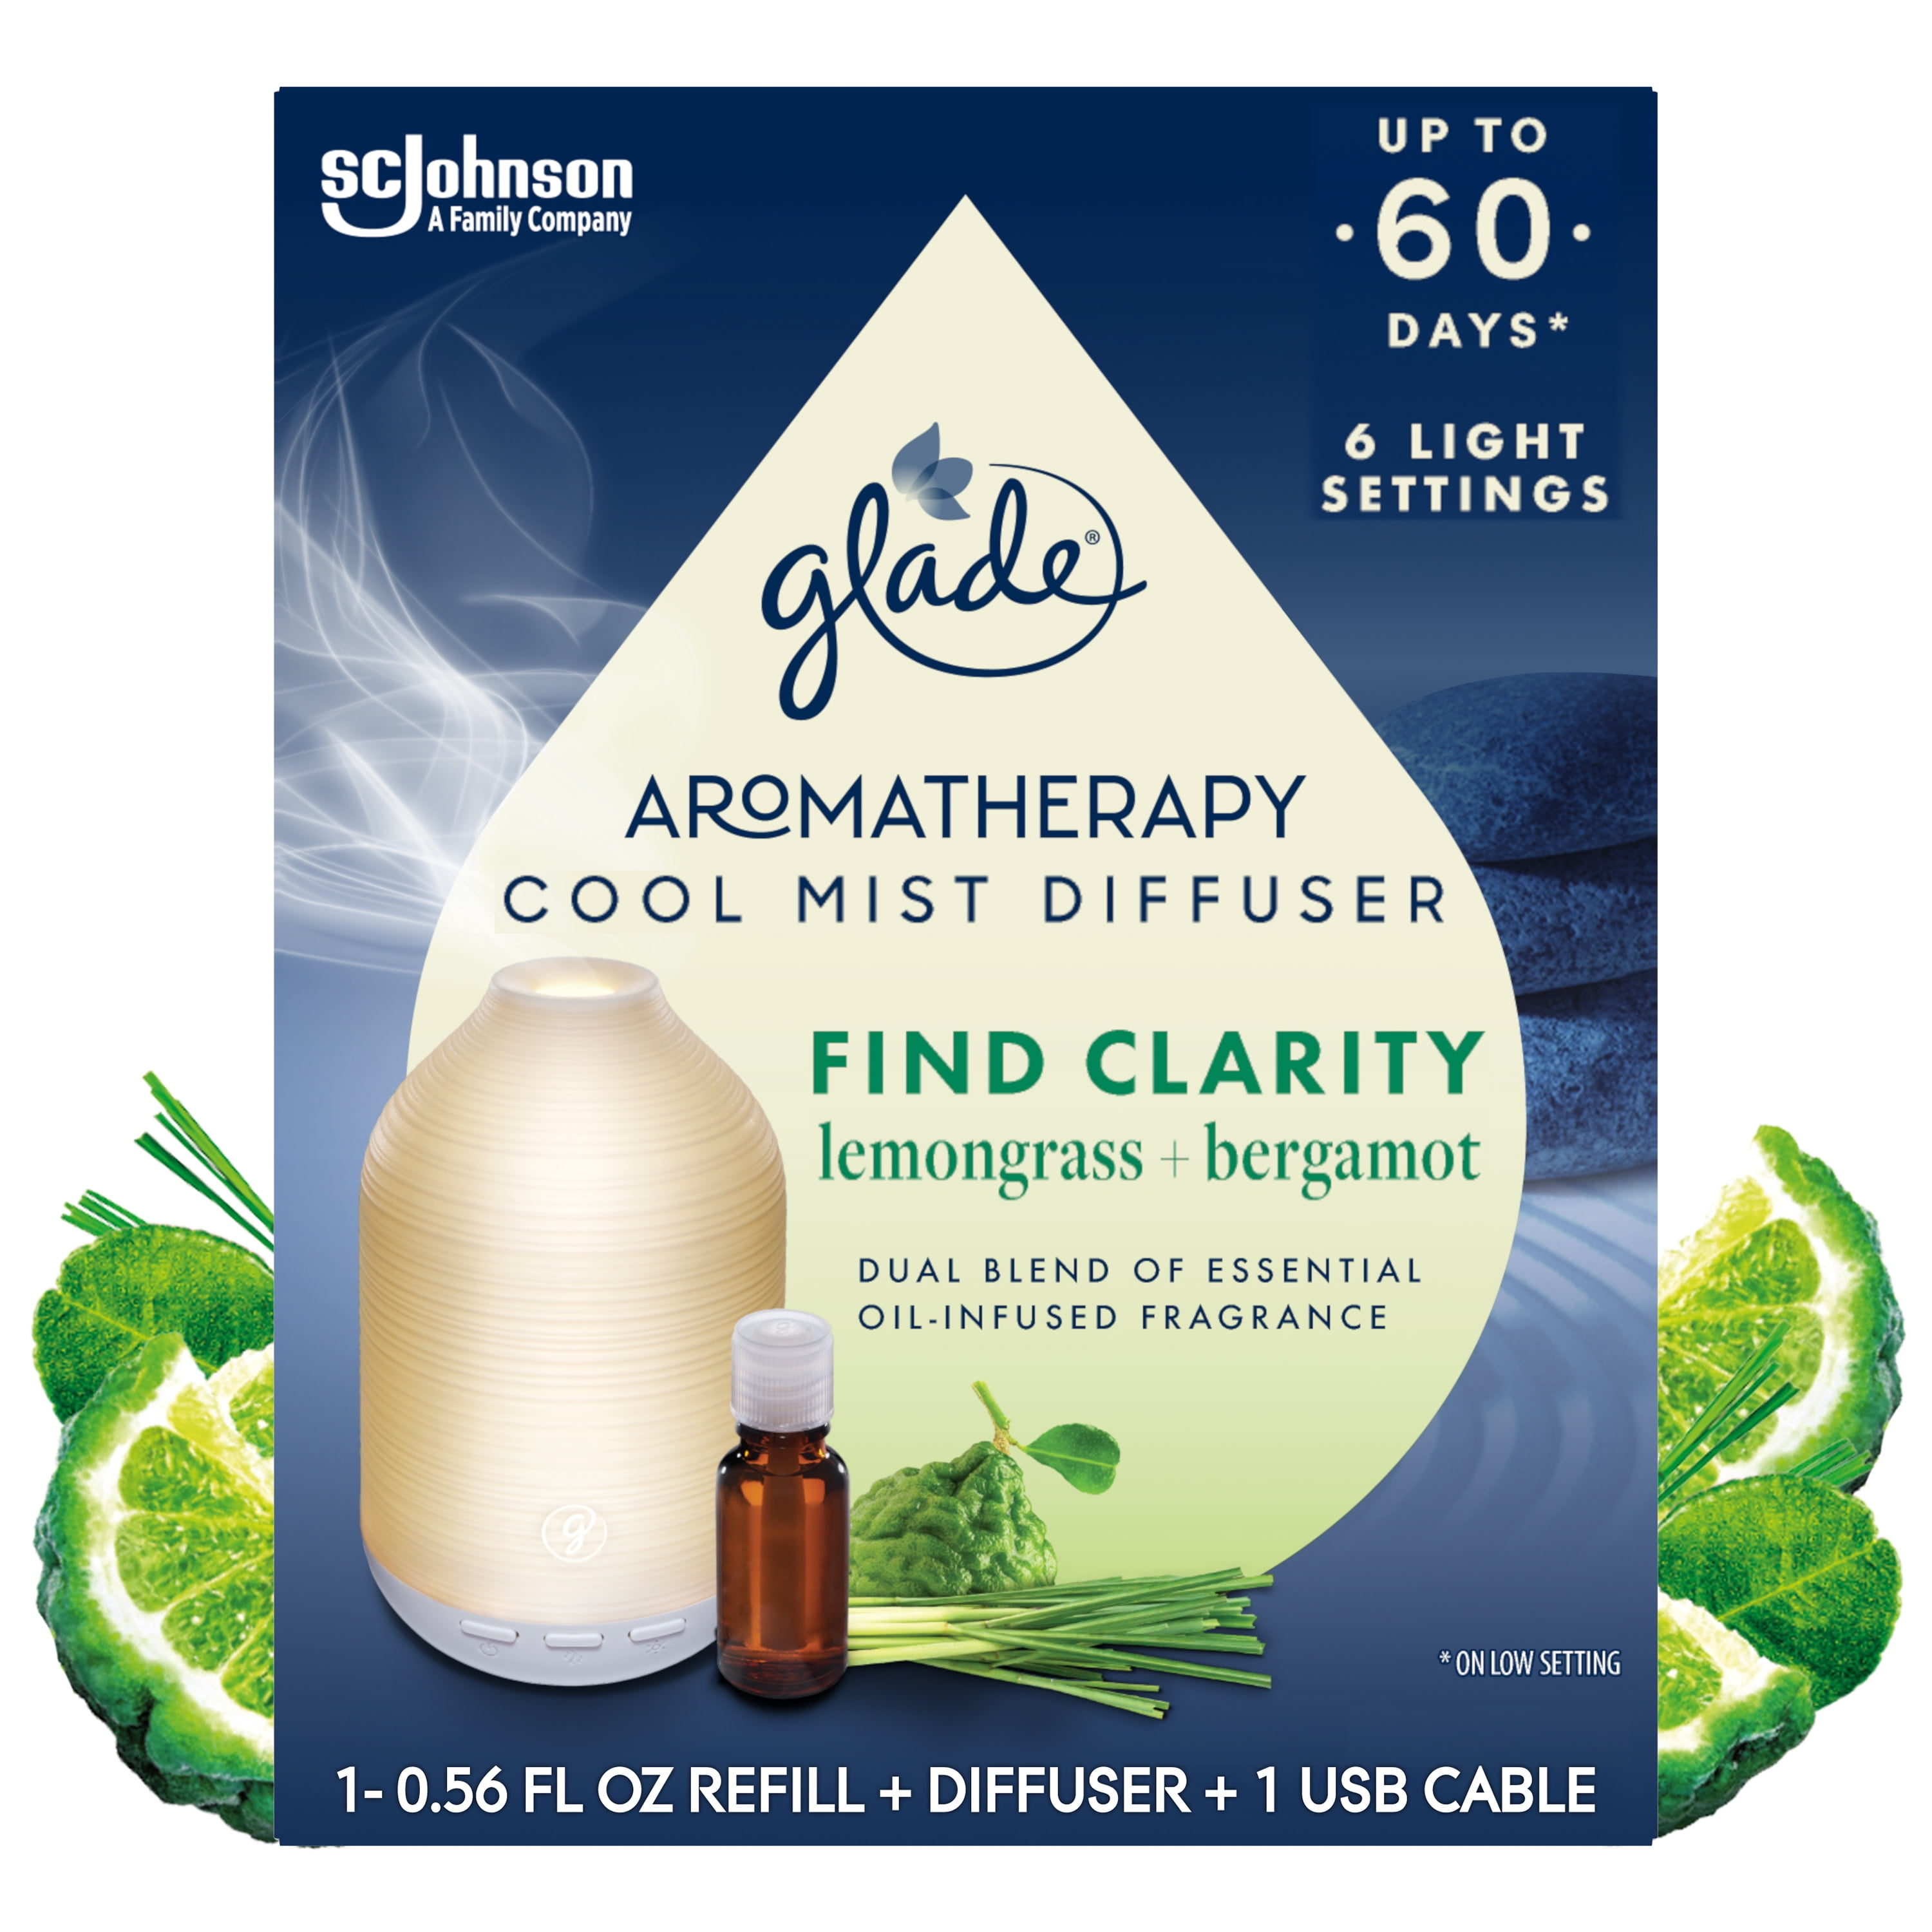 Glade Essential Oil Diffuser, Find Clarity Scentwith Notes of Bergamot & Lemongrass, 0.56 oz (16.8 ml), Cool Mist Aromatherapy Diffuser & Air Freshener for Home